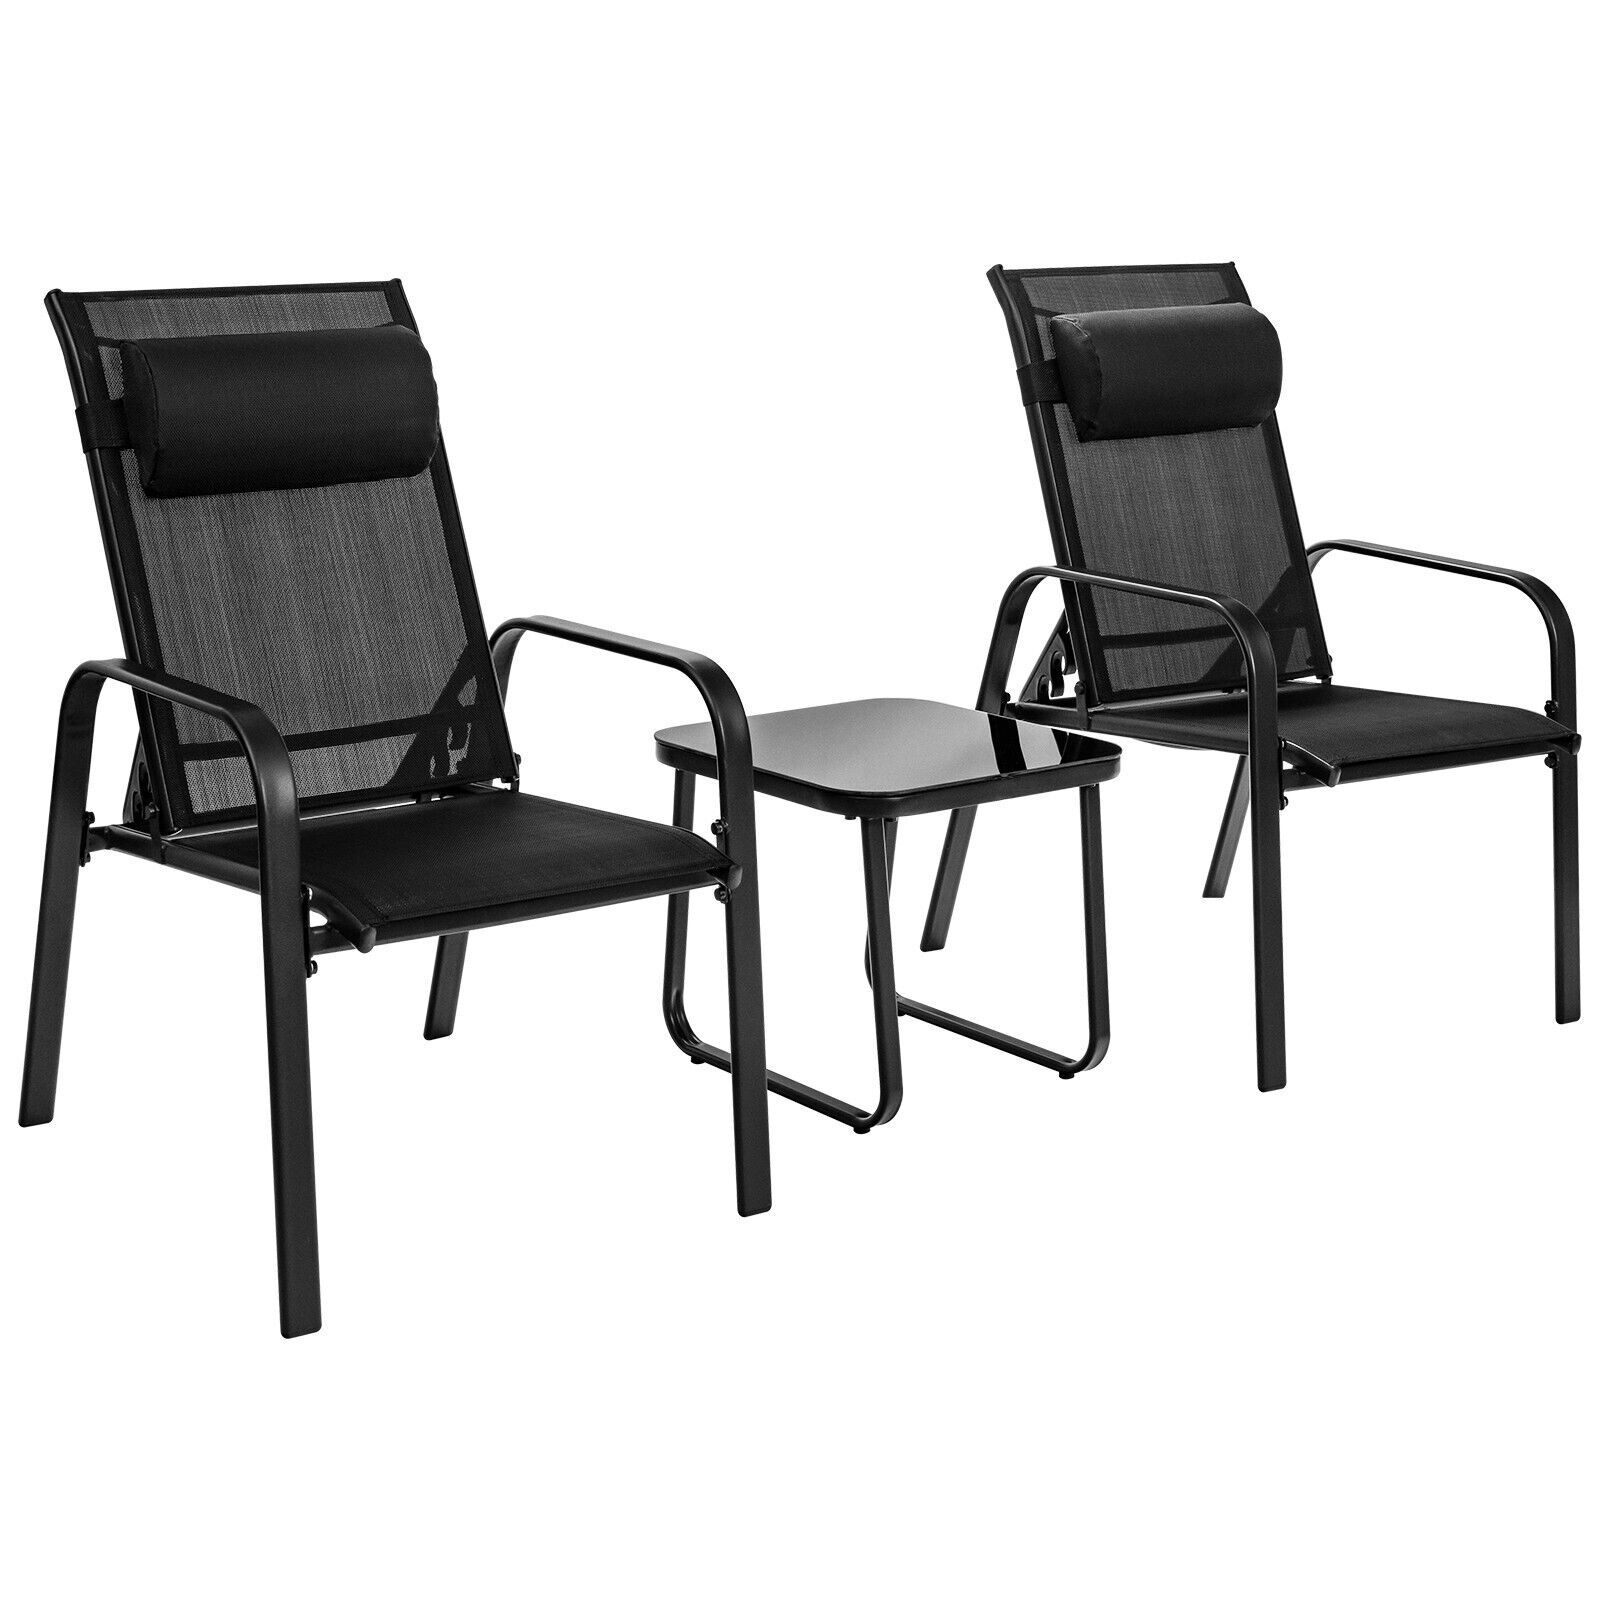 3 Pieces Patio Bistro Set with Coffee Table and 2 Stackable Chairs